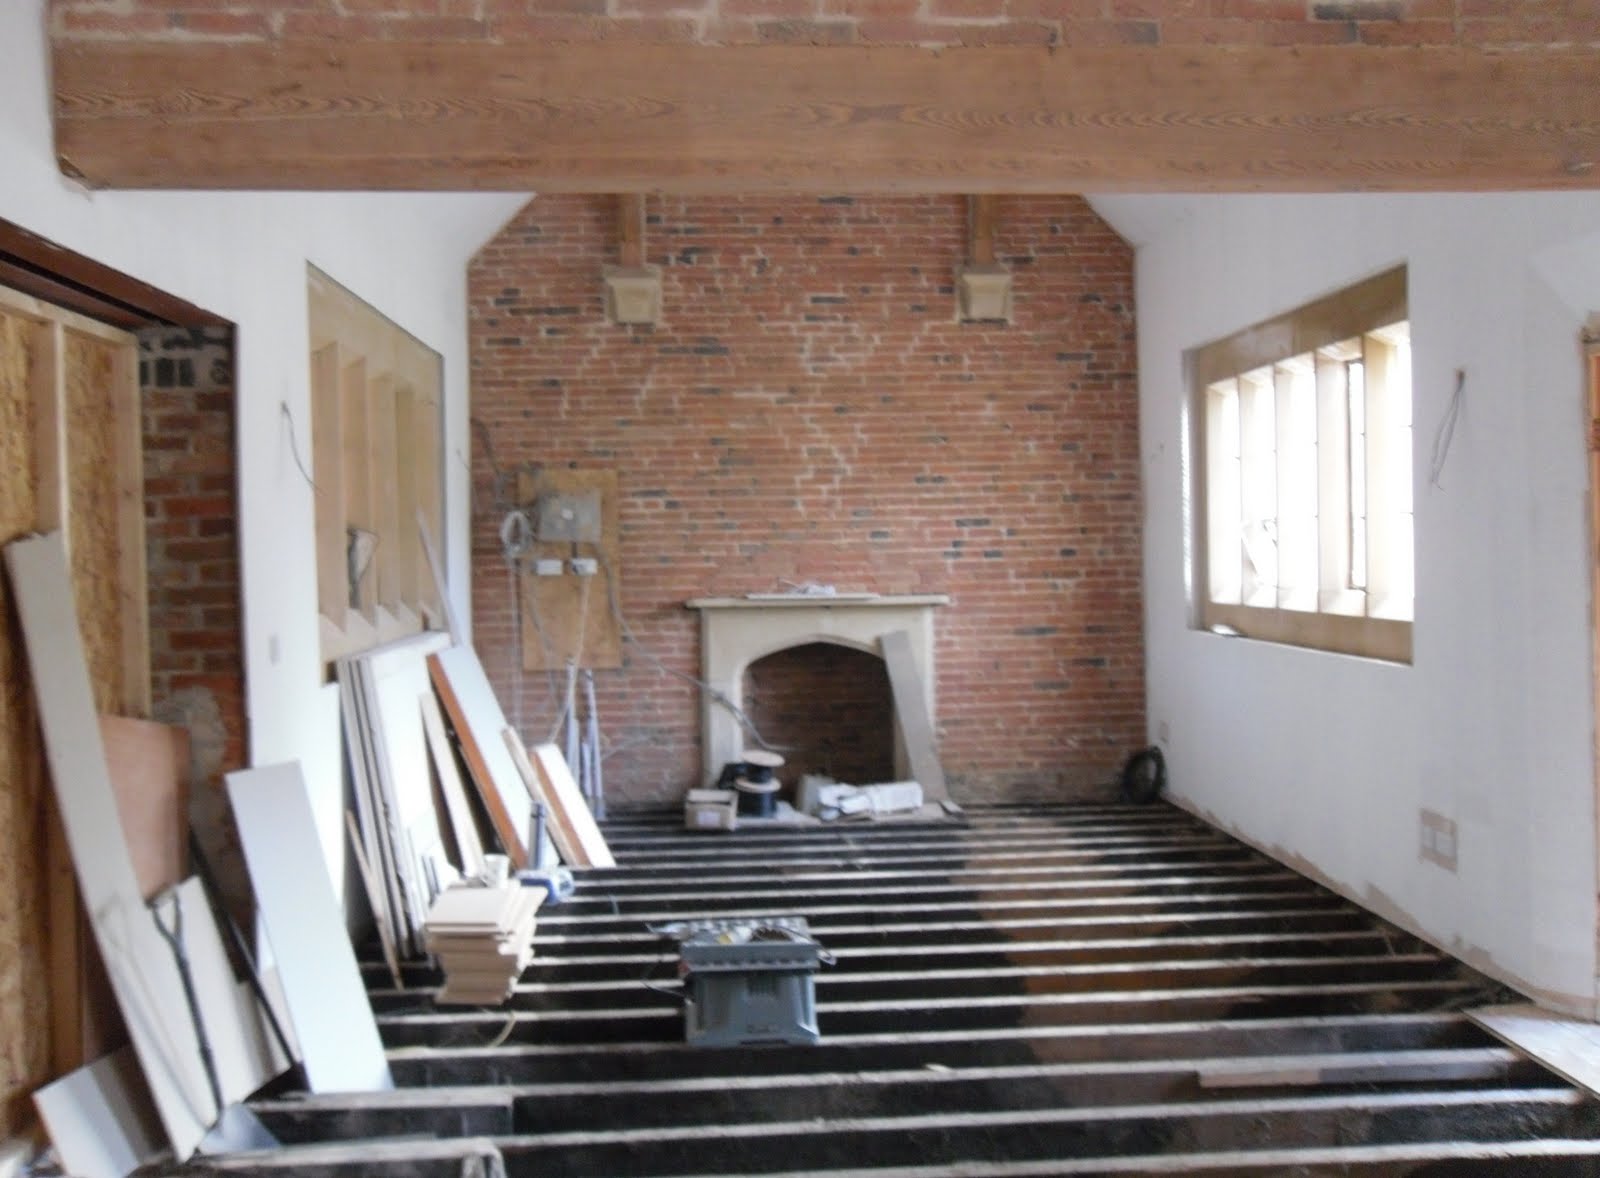 The old school being converted into a house 2013 - image from Dr Tony Shaw's blog.